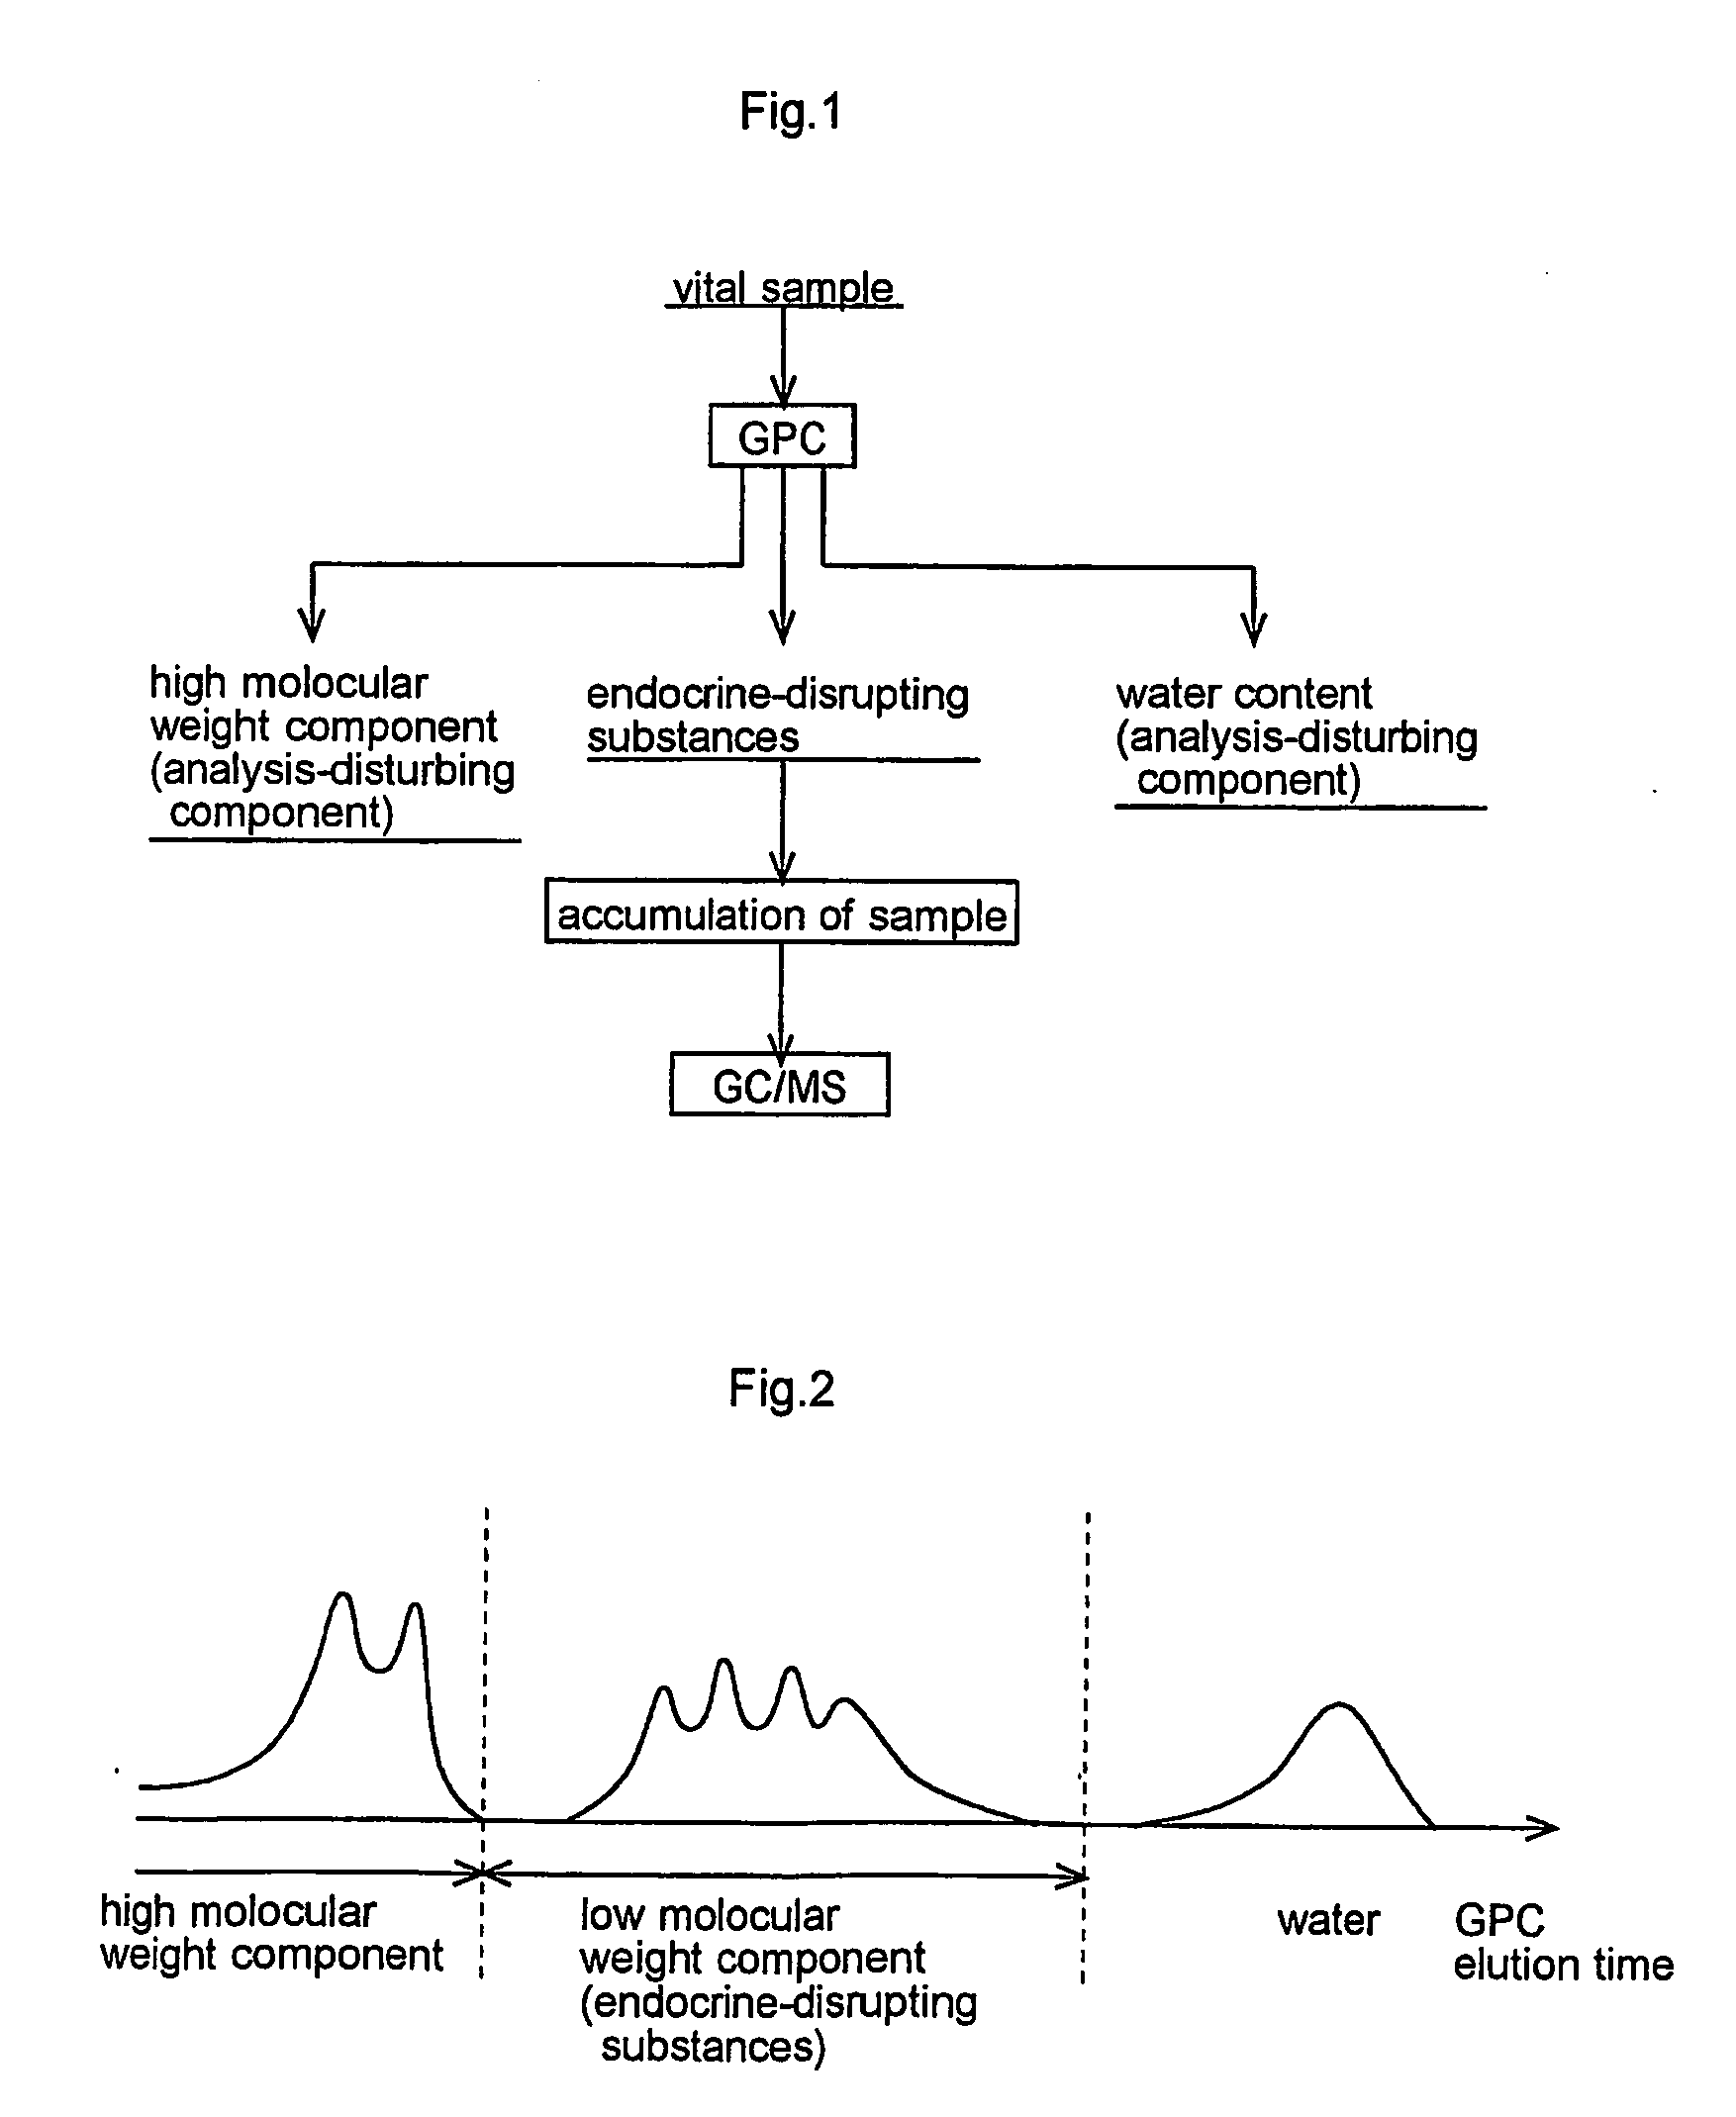 Method and apparatus for analyzing endocrine-distrupting substances in vital sample